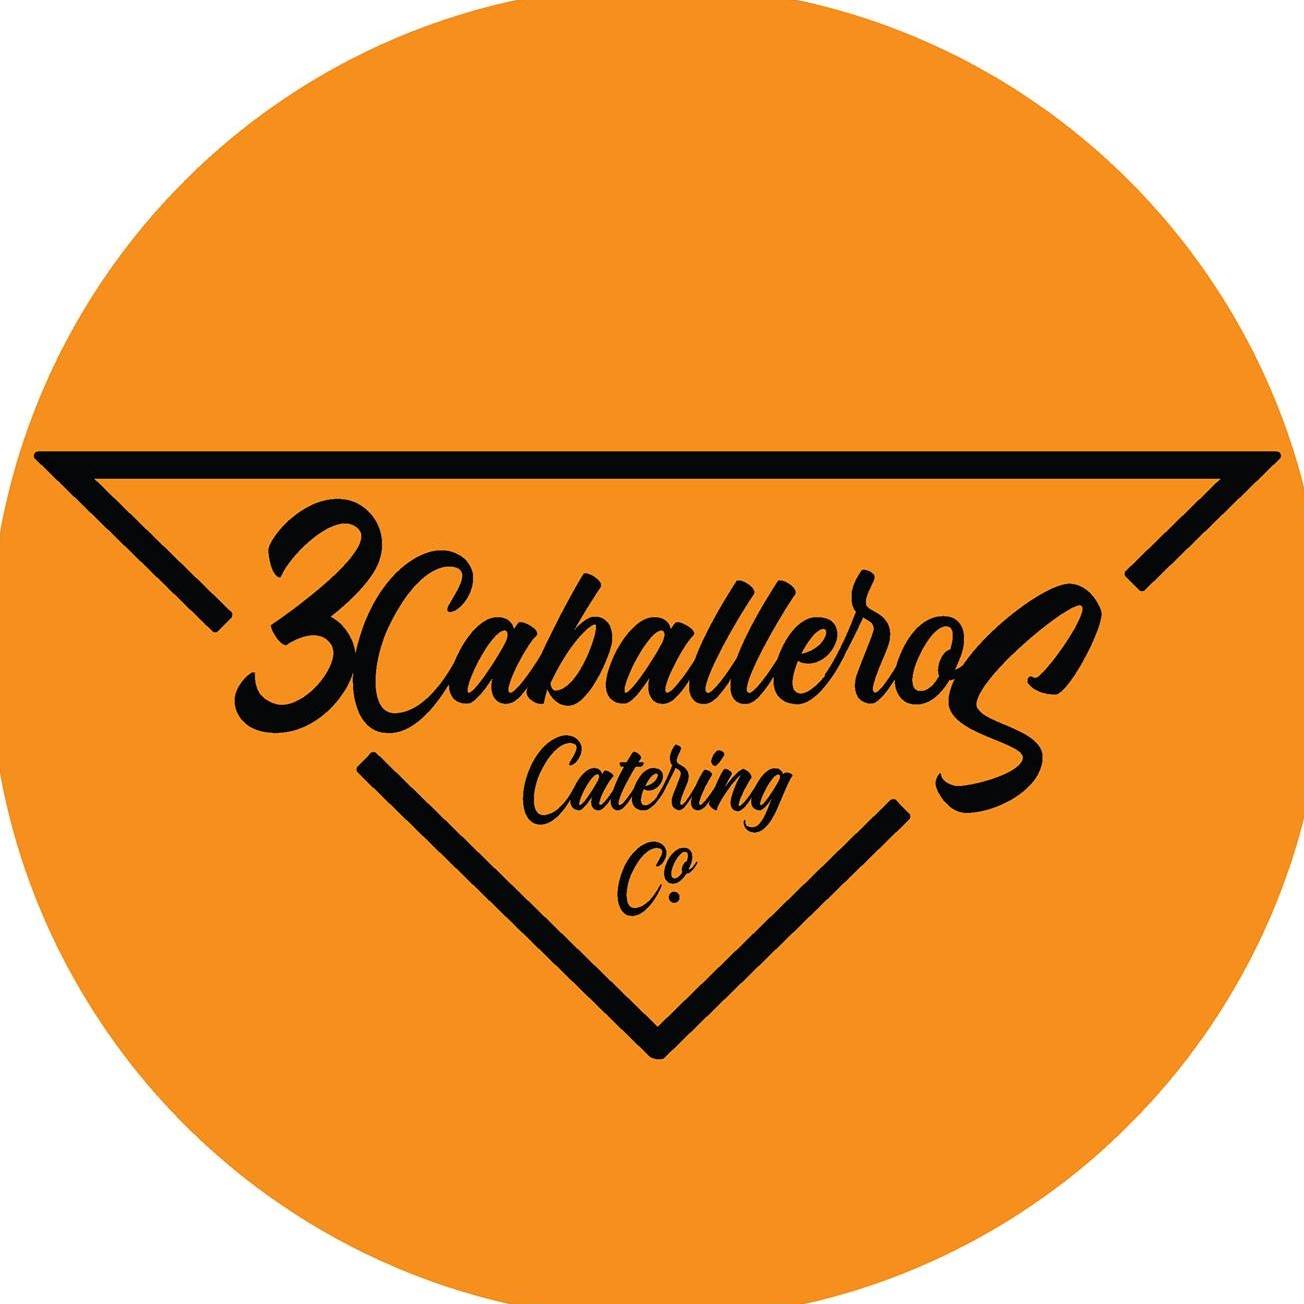 3 Caballeros Catering Company